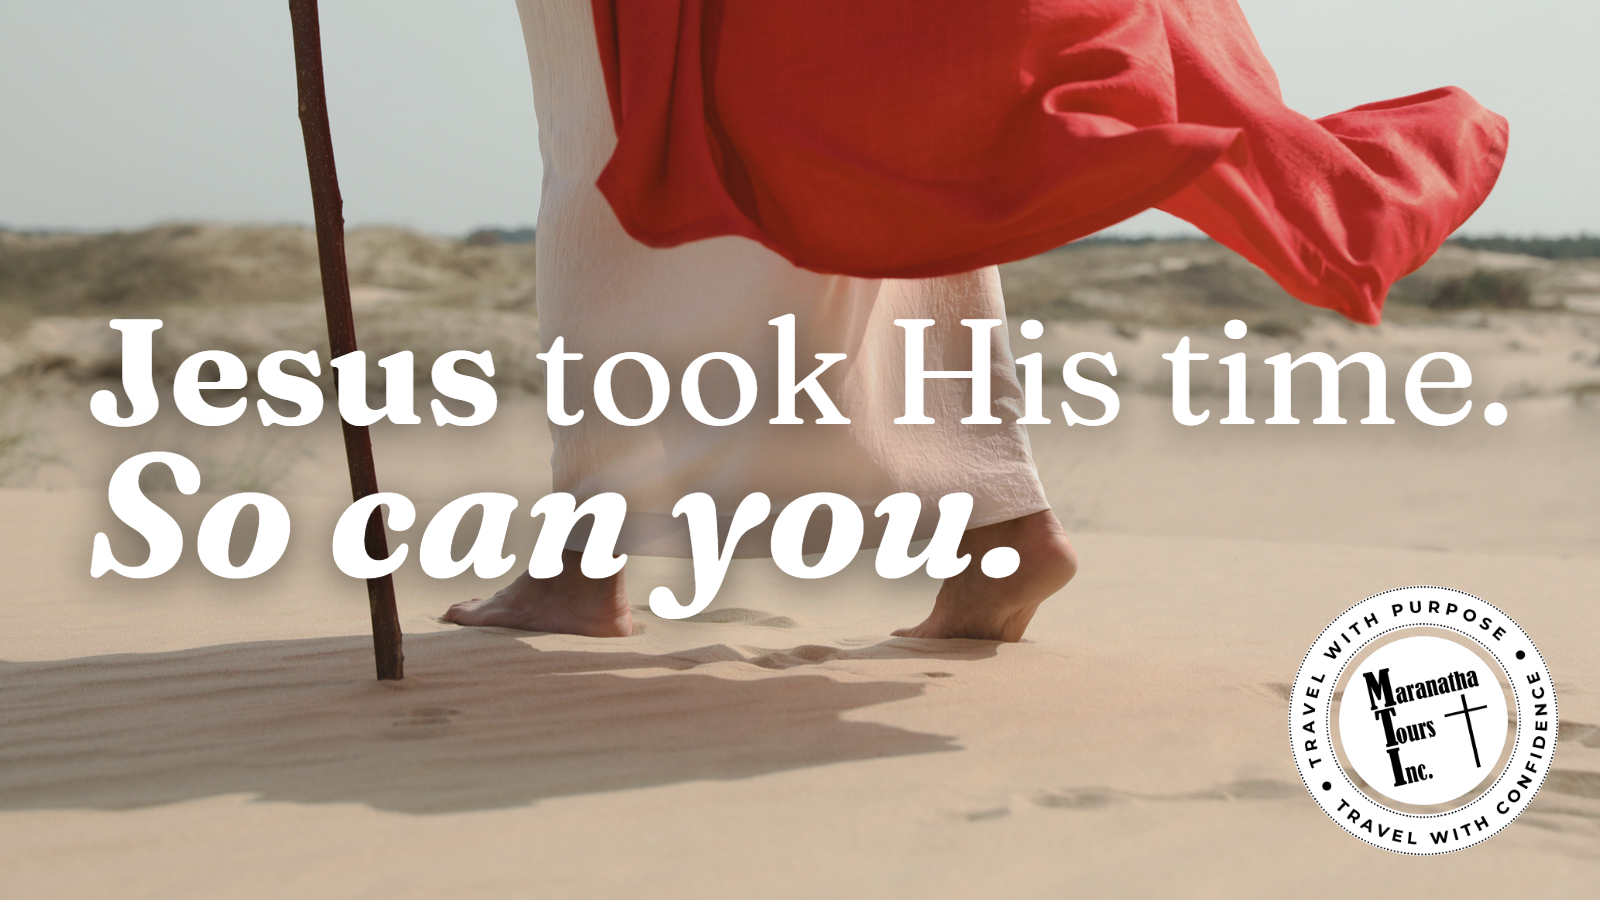 Jesus took His time. So can you.